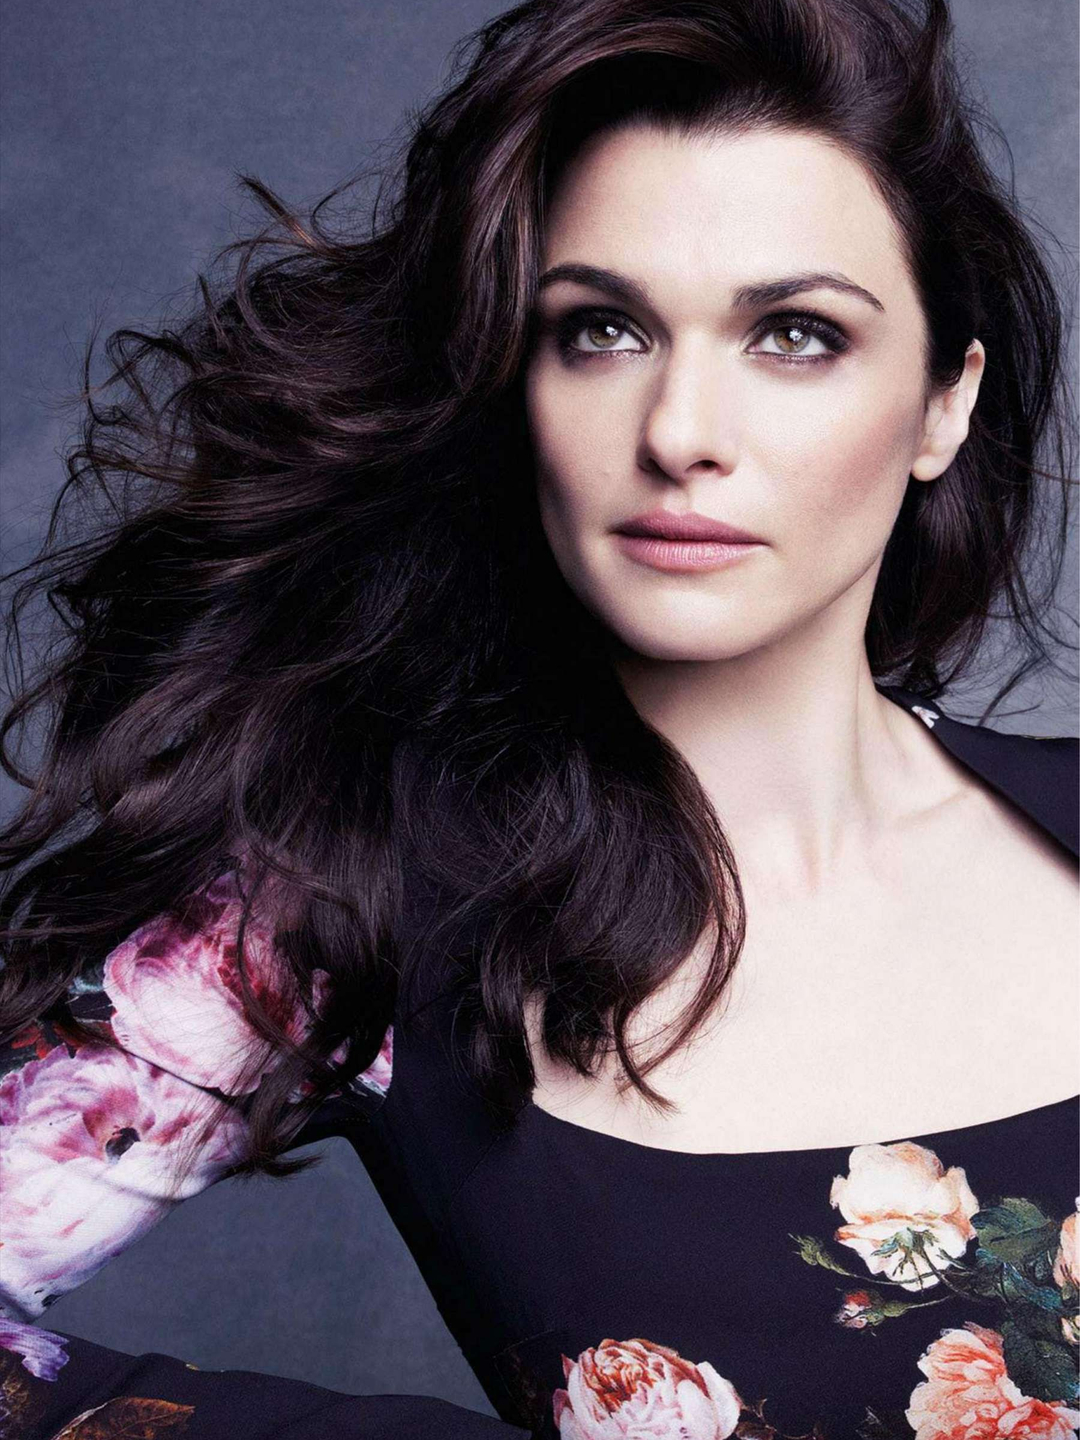 Rachel Weisz how did she became famous